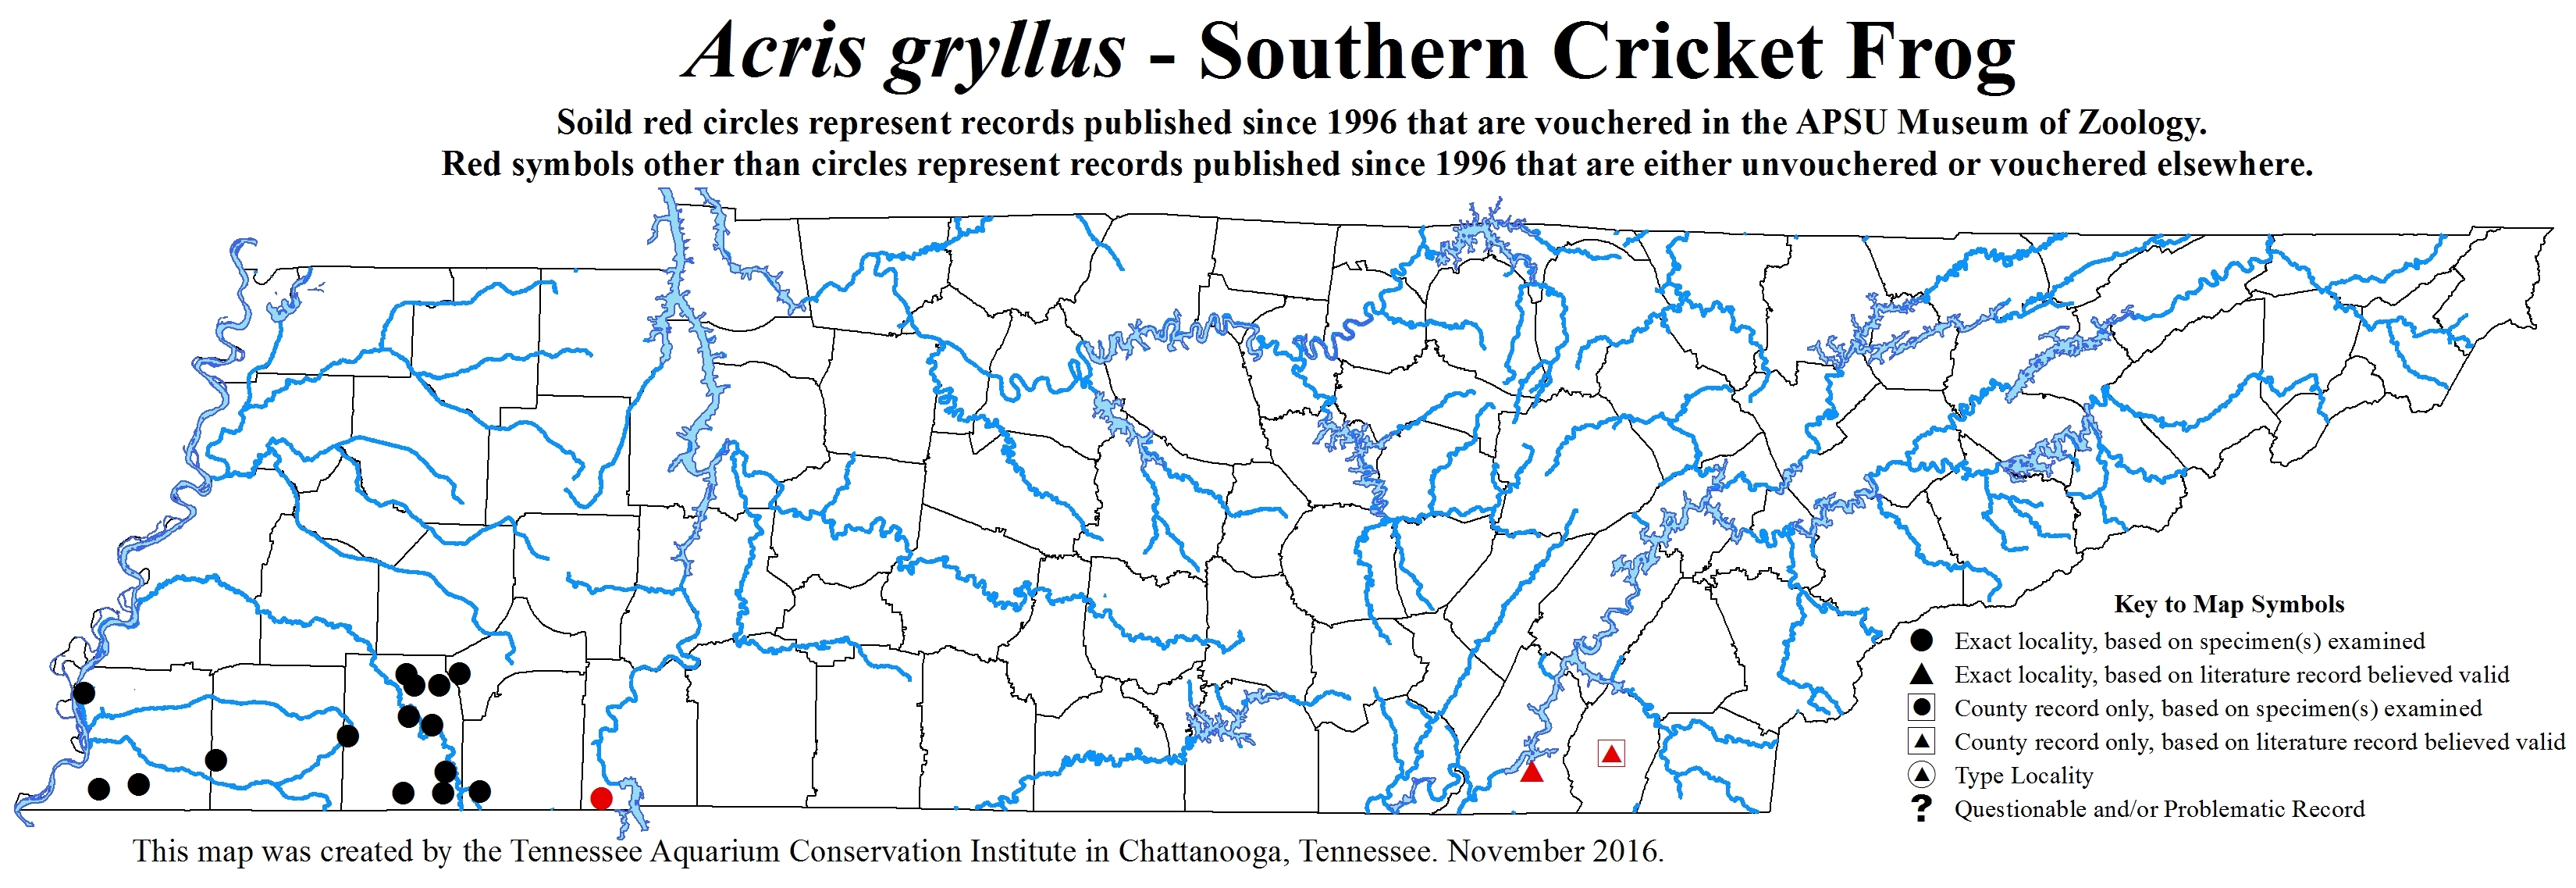 New Distribution Map - Acris gryllus (LeConte - Southern Cricket Frog